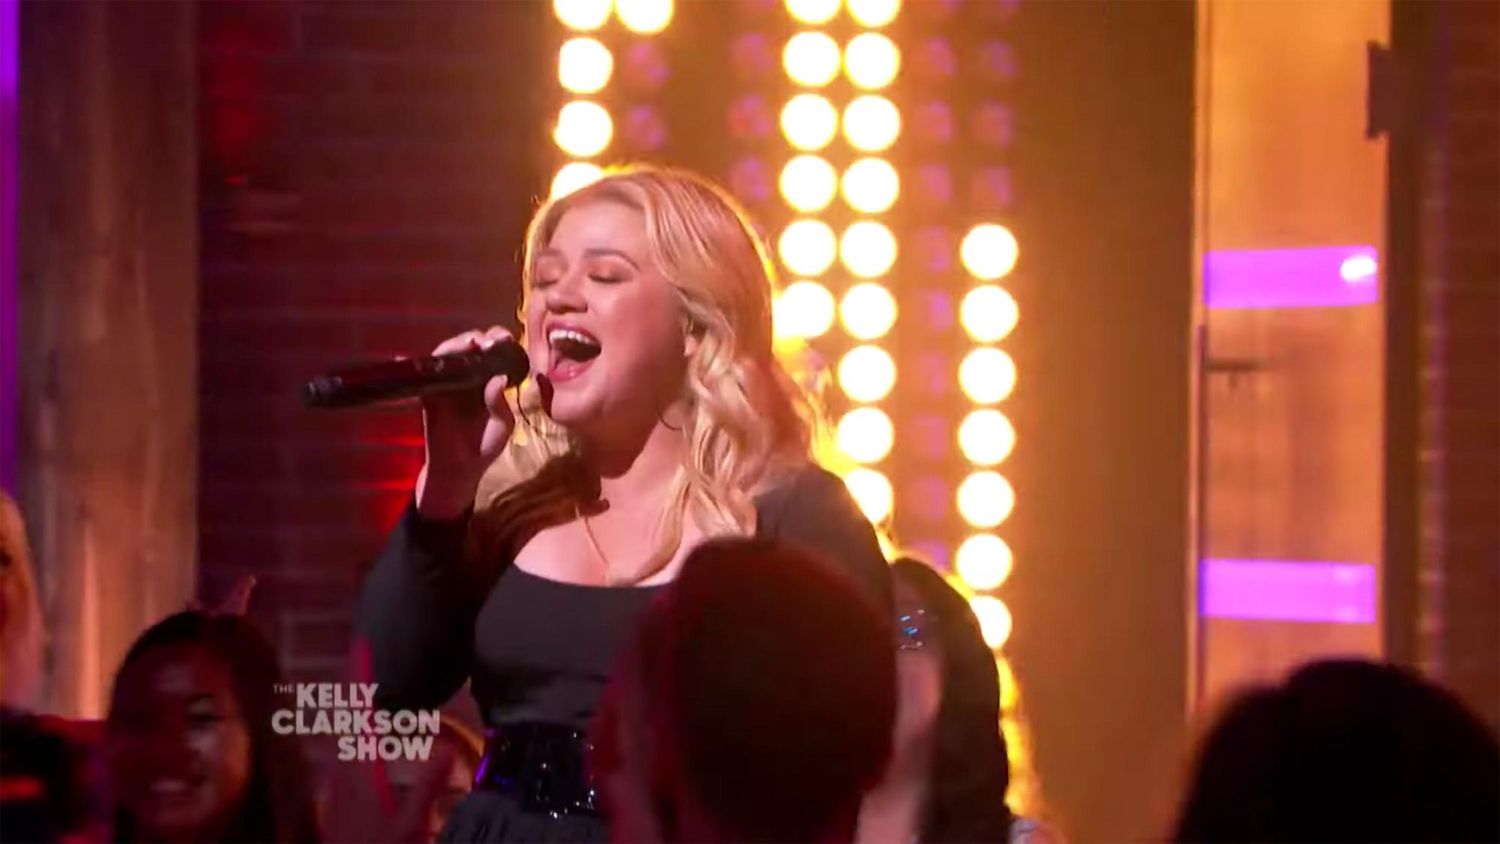 The Kelly Clarkson Show screen grab